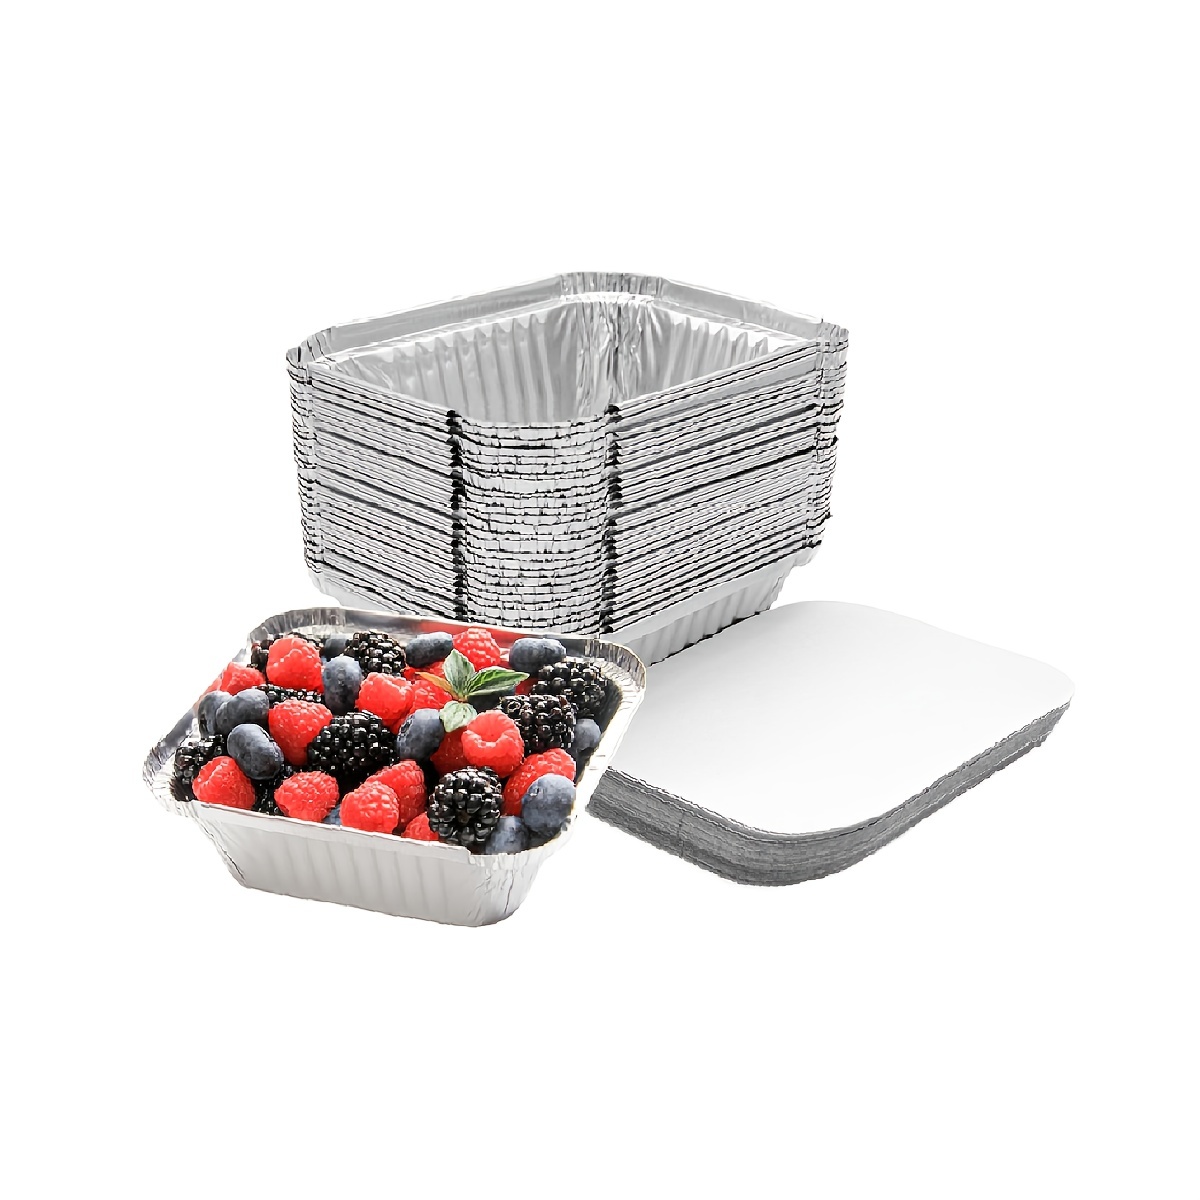 Aluminum Pans Trays With Aluminum Lids 10 Pack 3 Liter - 9x13 Inch Half  Size Disposable Baking Containers - Recyclable Pans for Storing Serving 